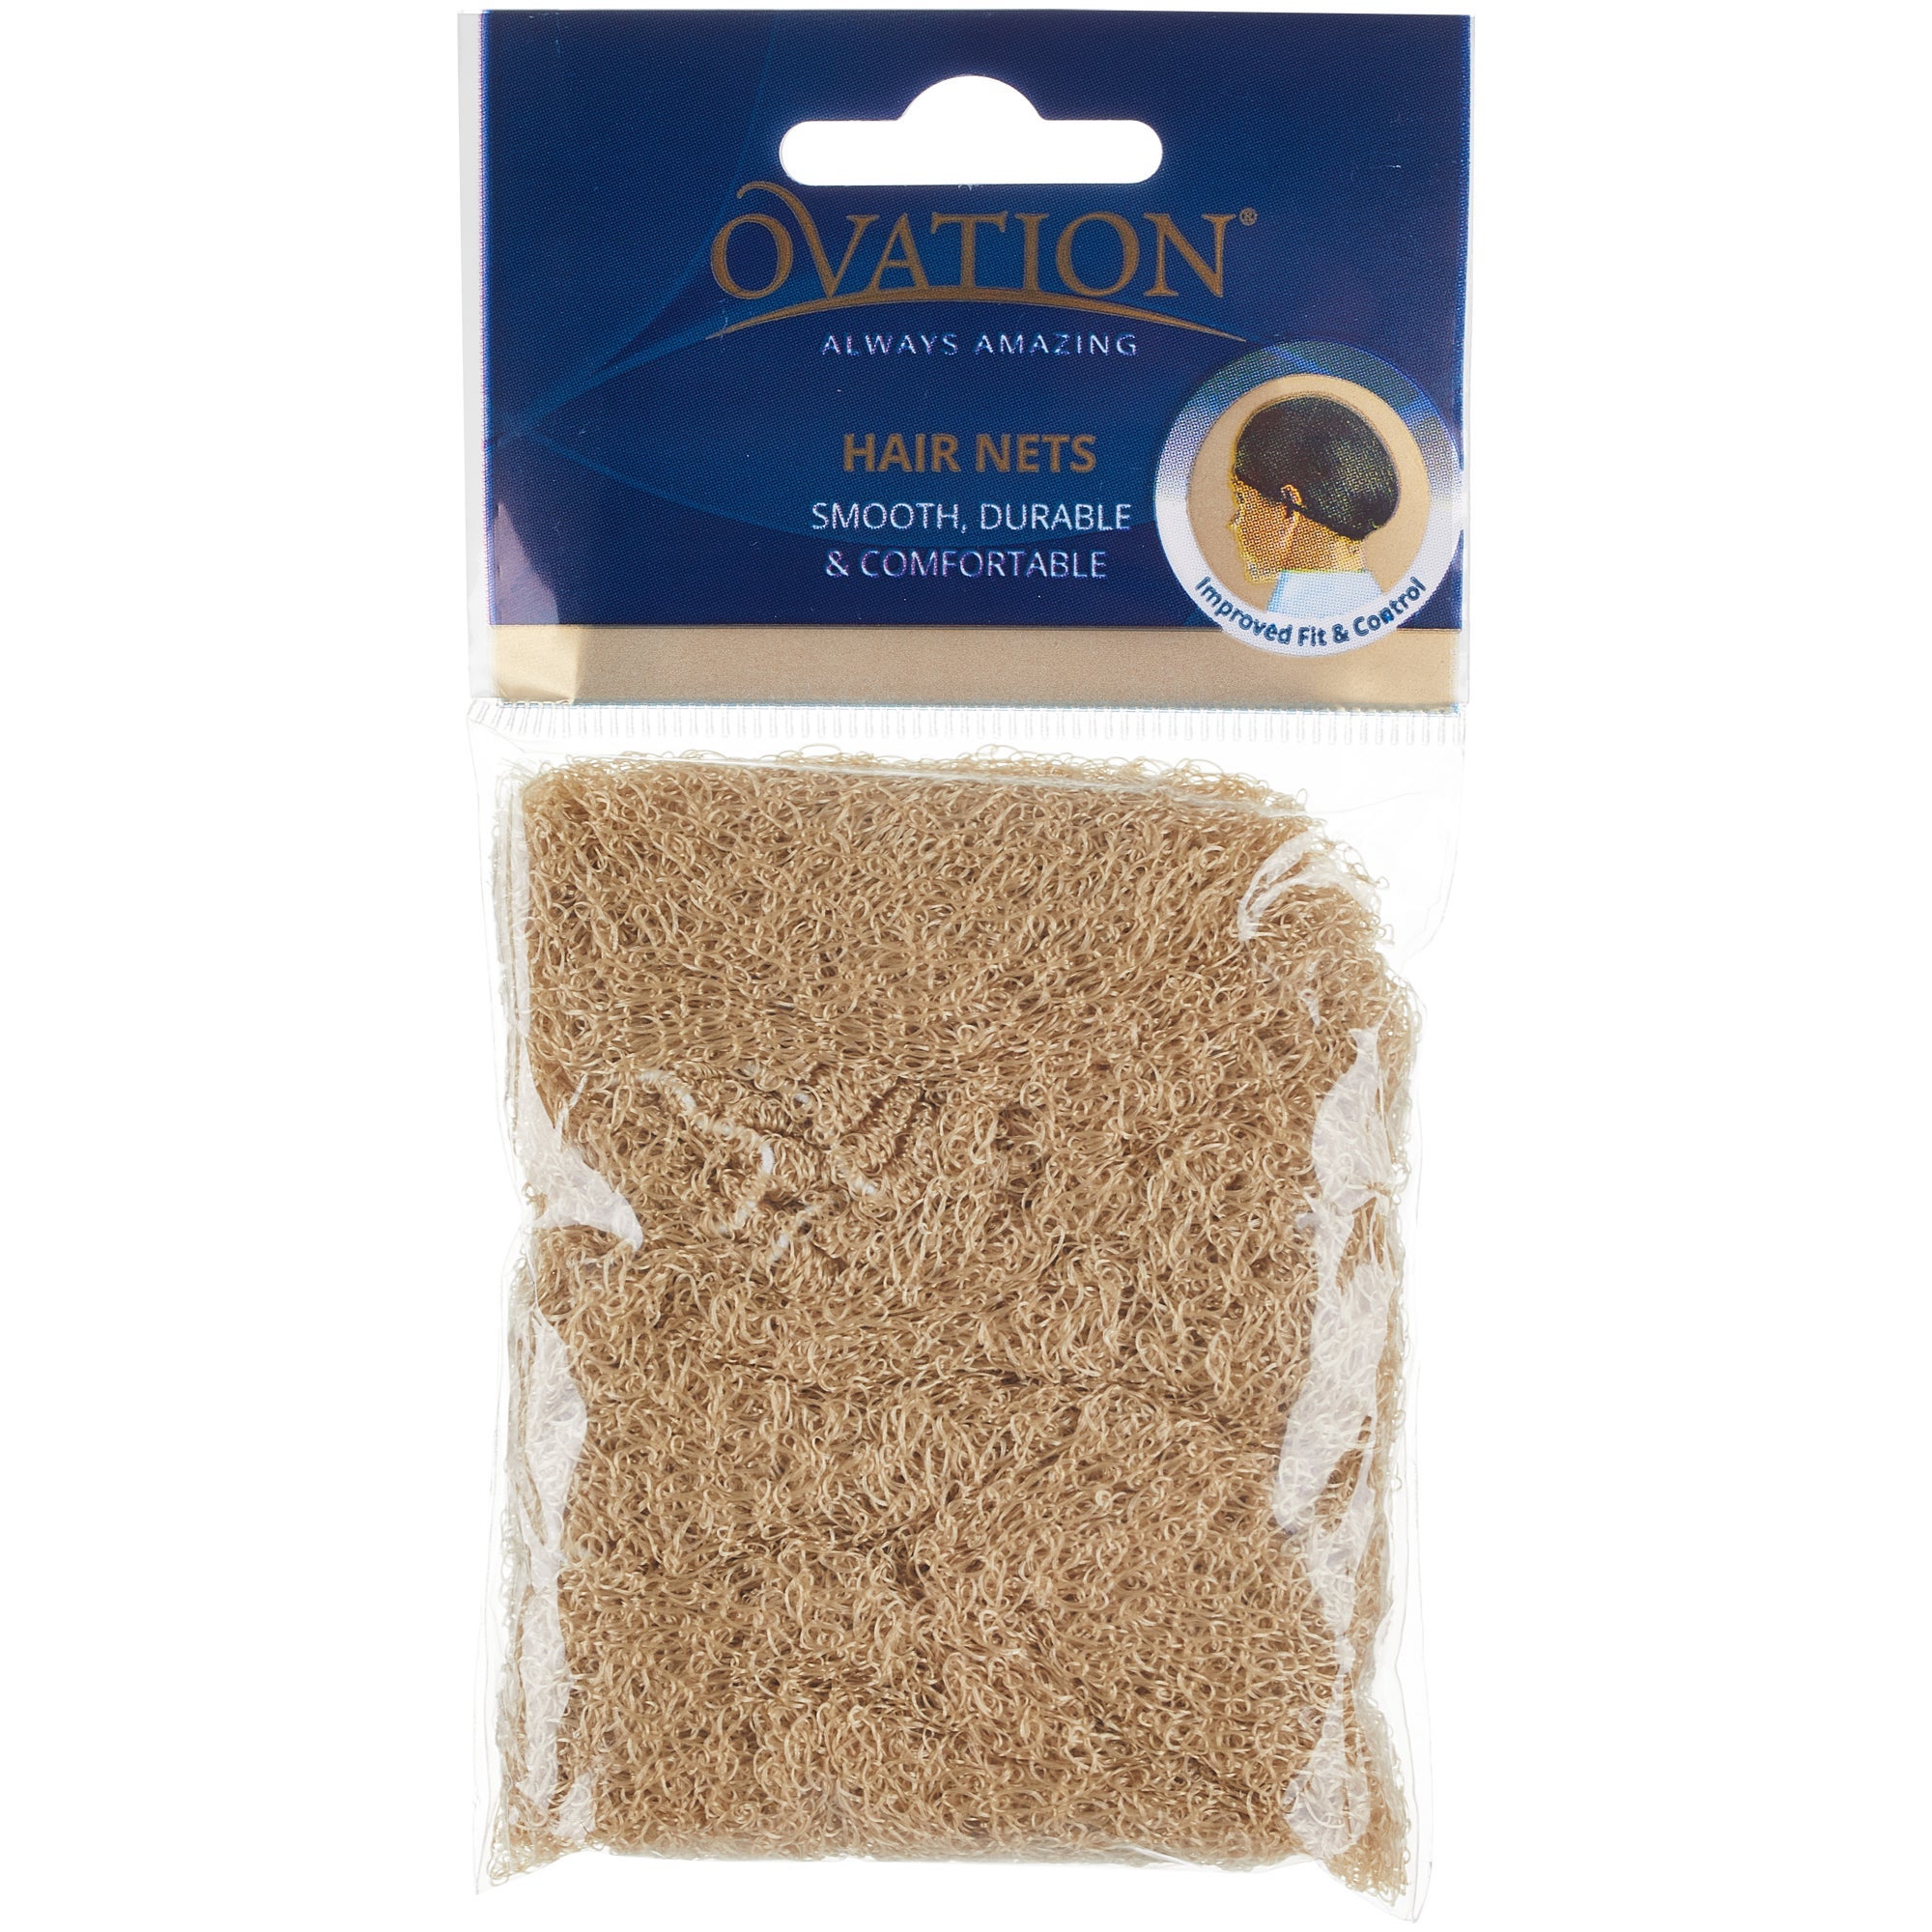 Ovation Deluxe Hair Net Pack of 2 